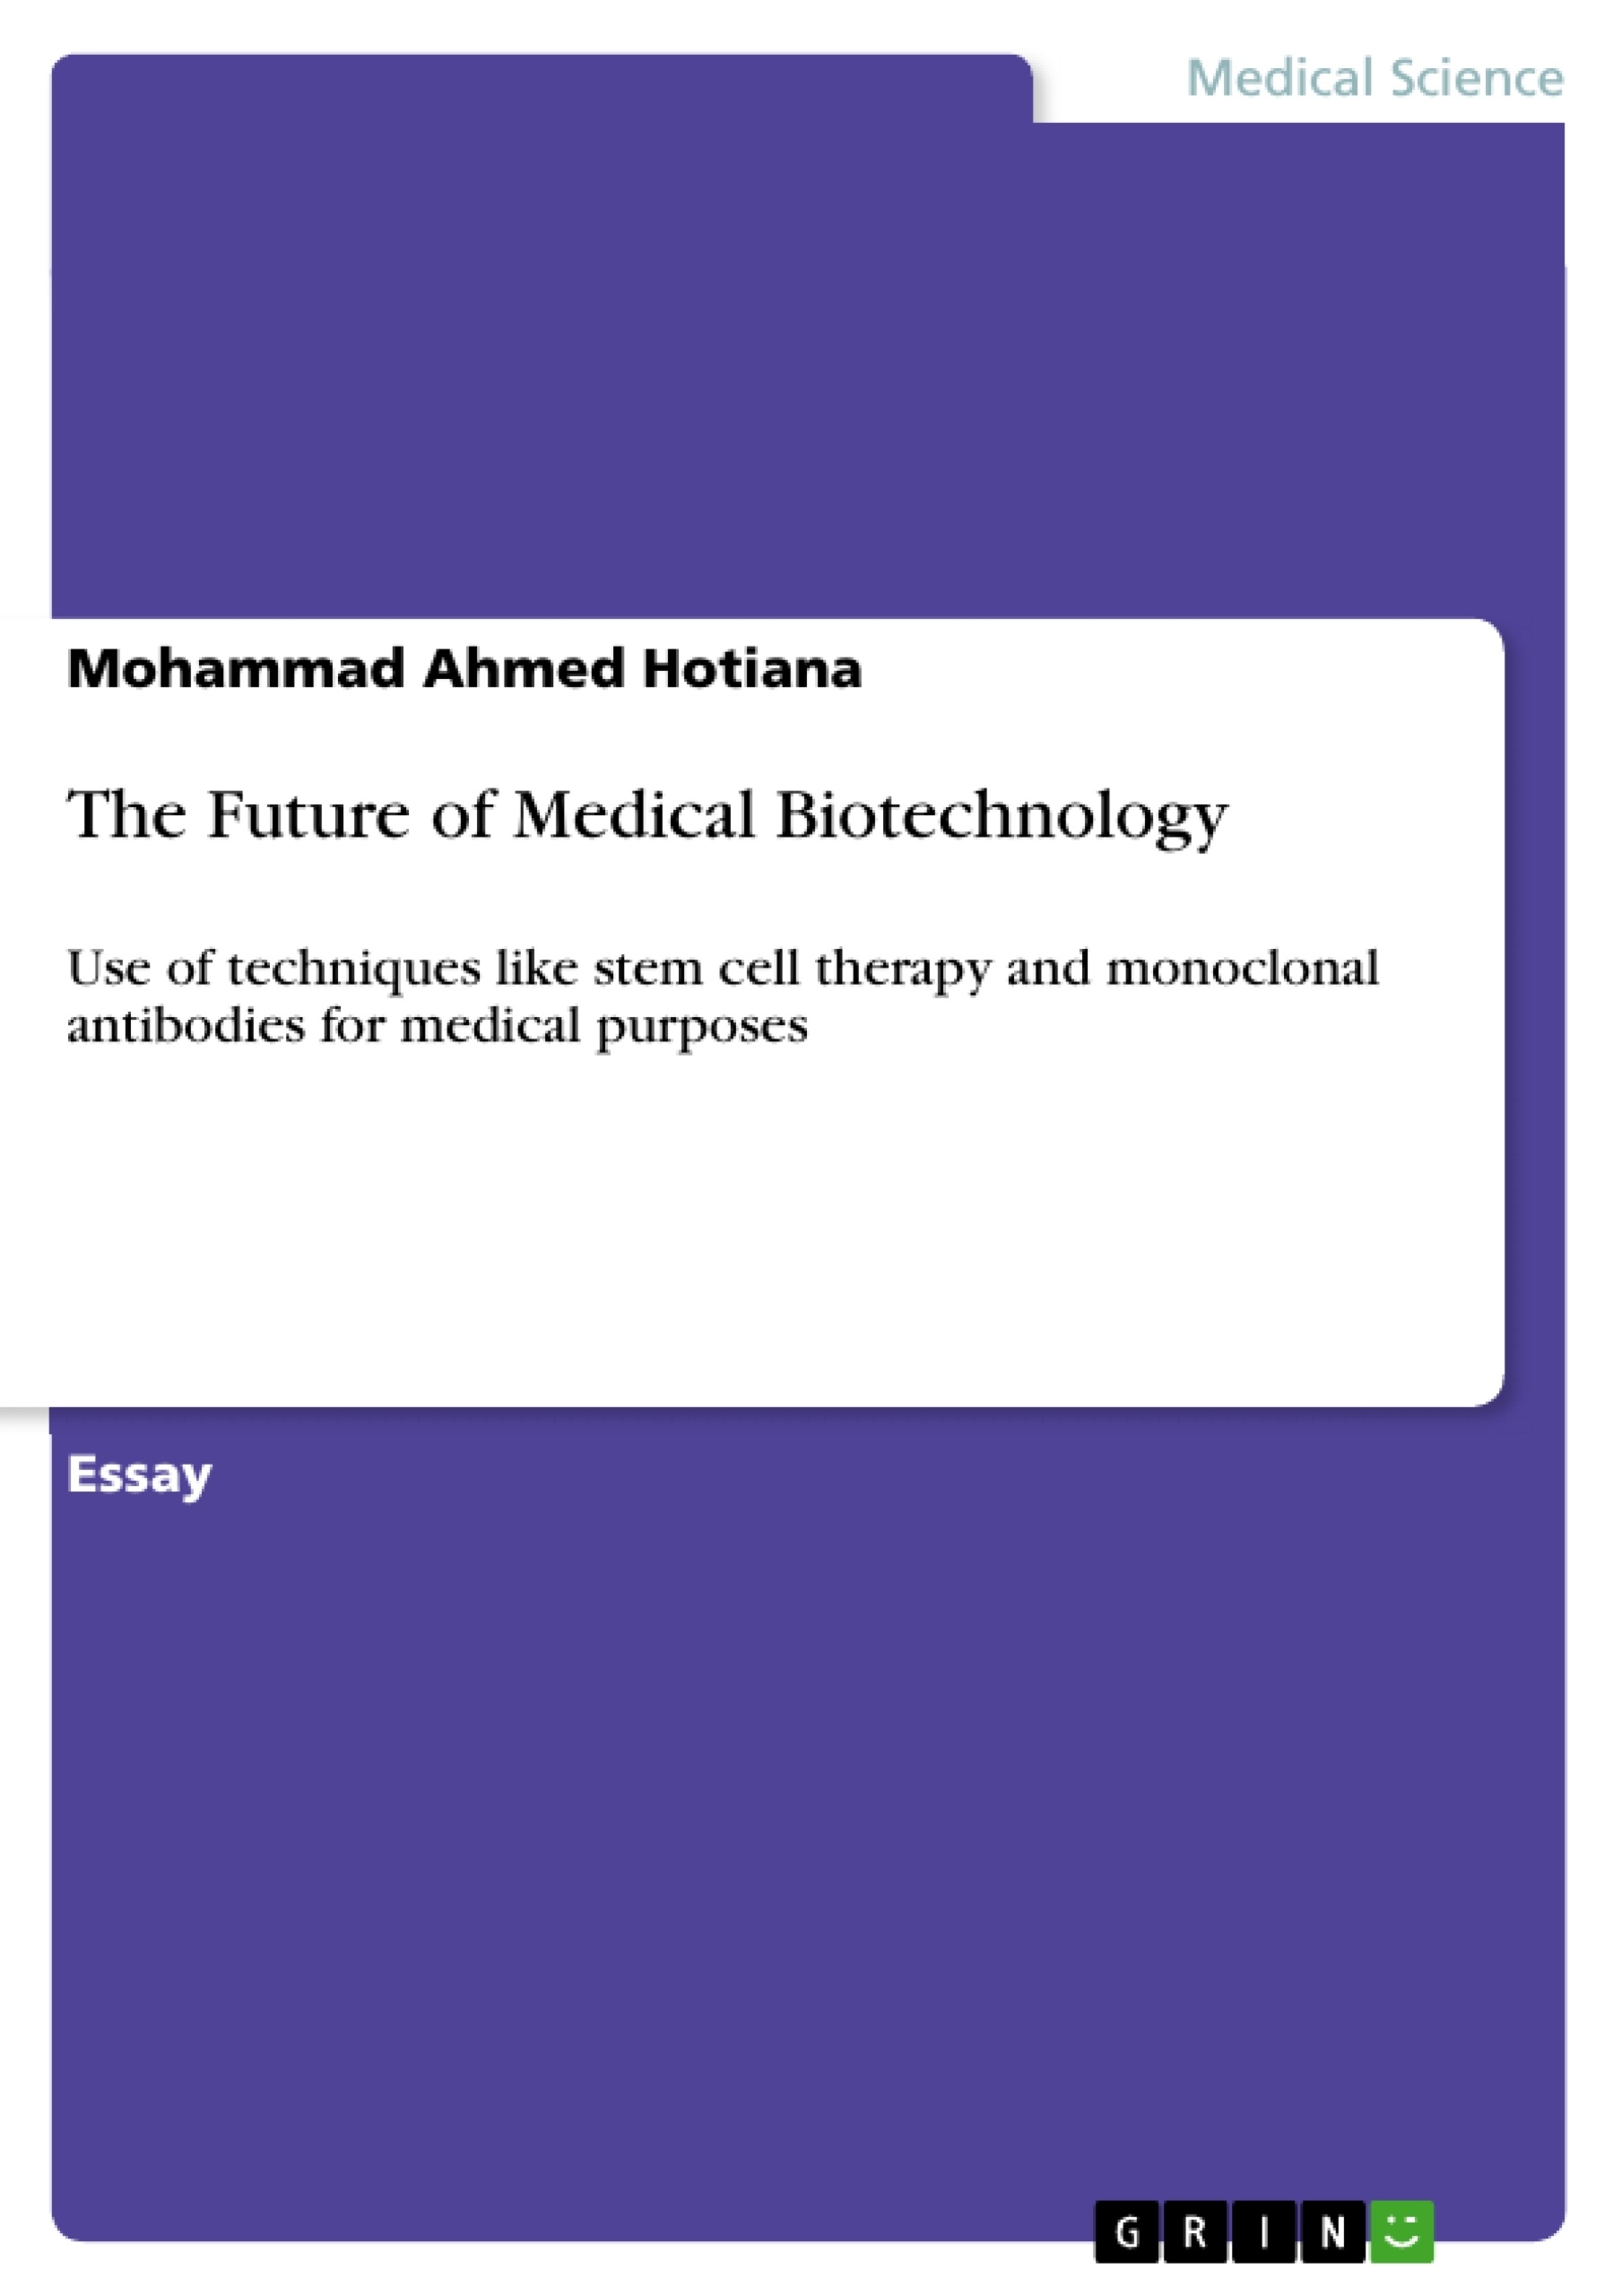 Title: The Future of Medical Biotechnology